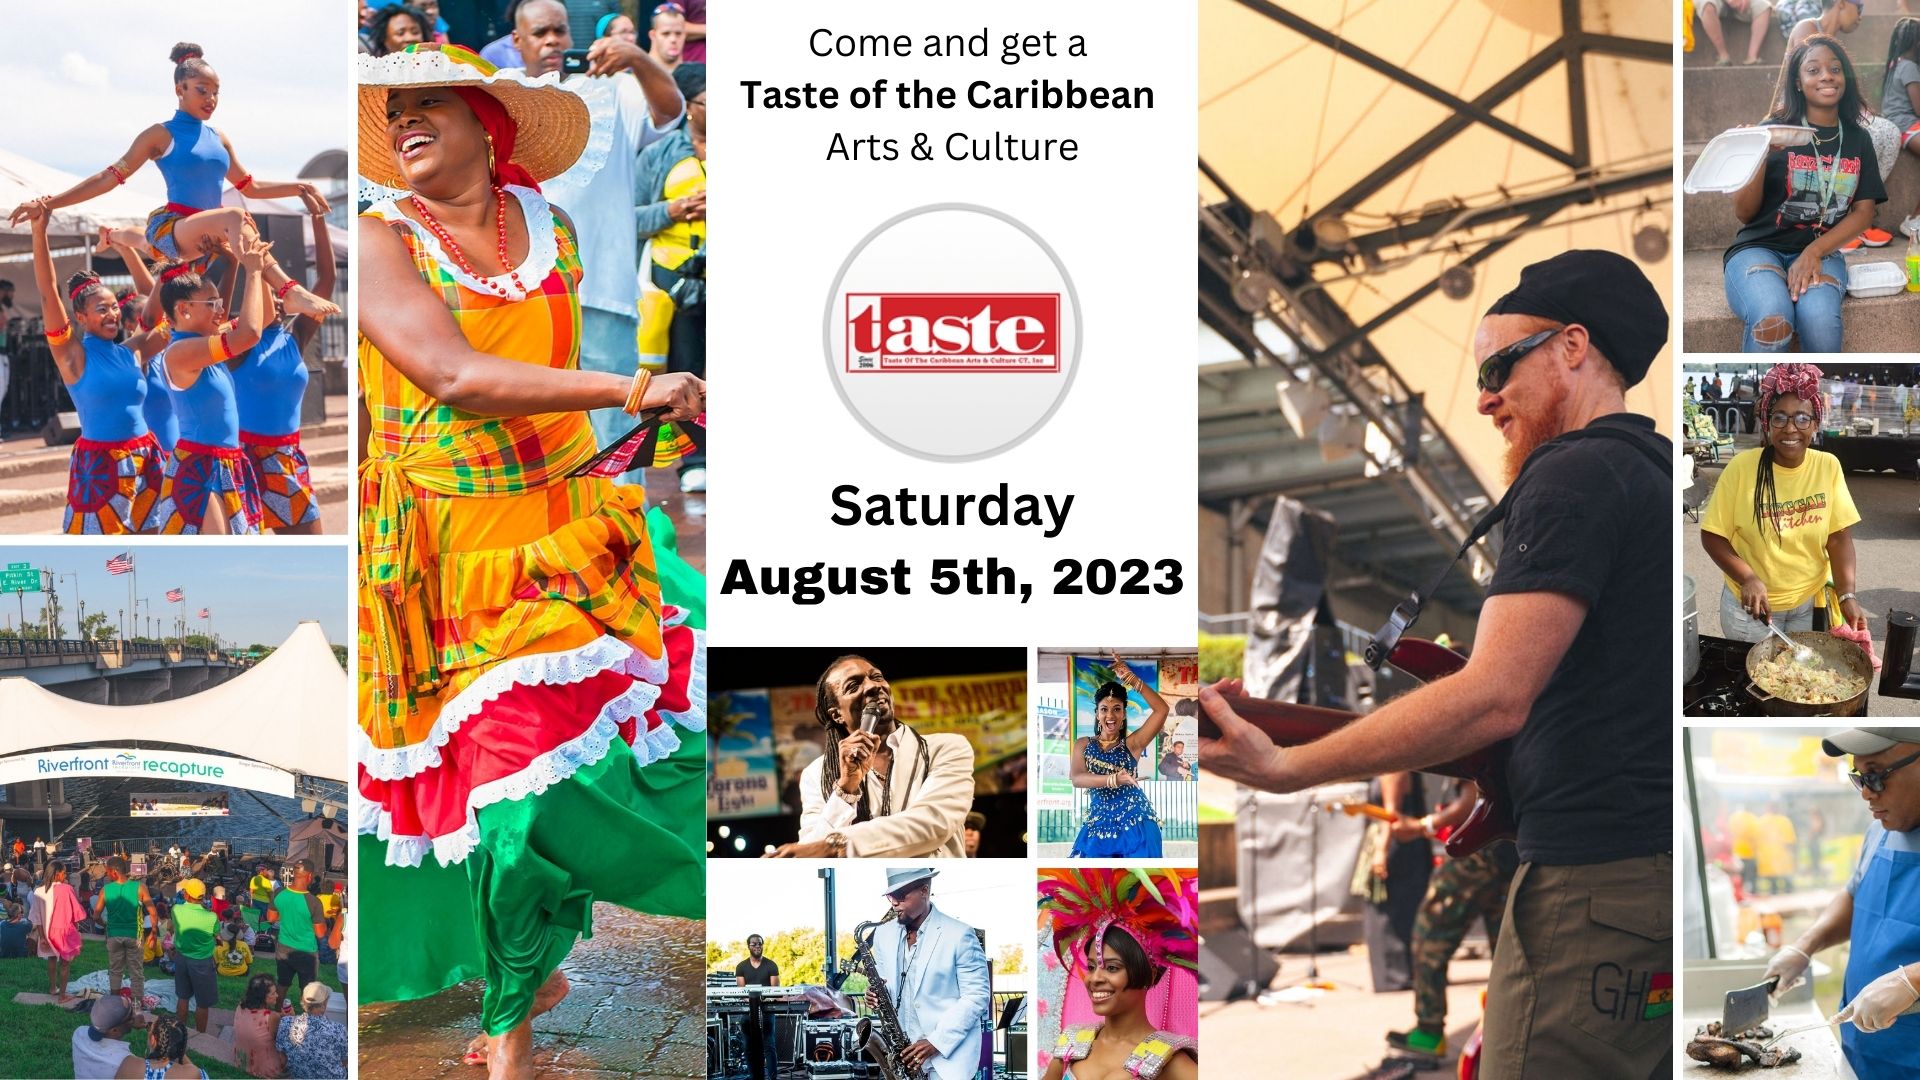 SAVE the Date 2023 - Taste of the Caribbean Arts & Culture - Tastect.org